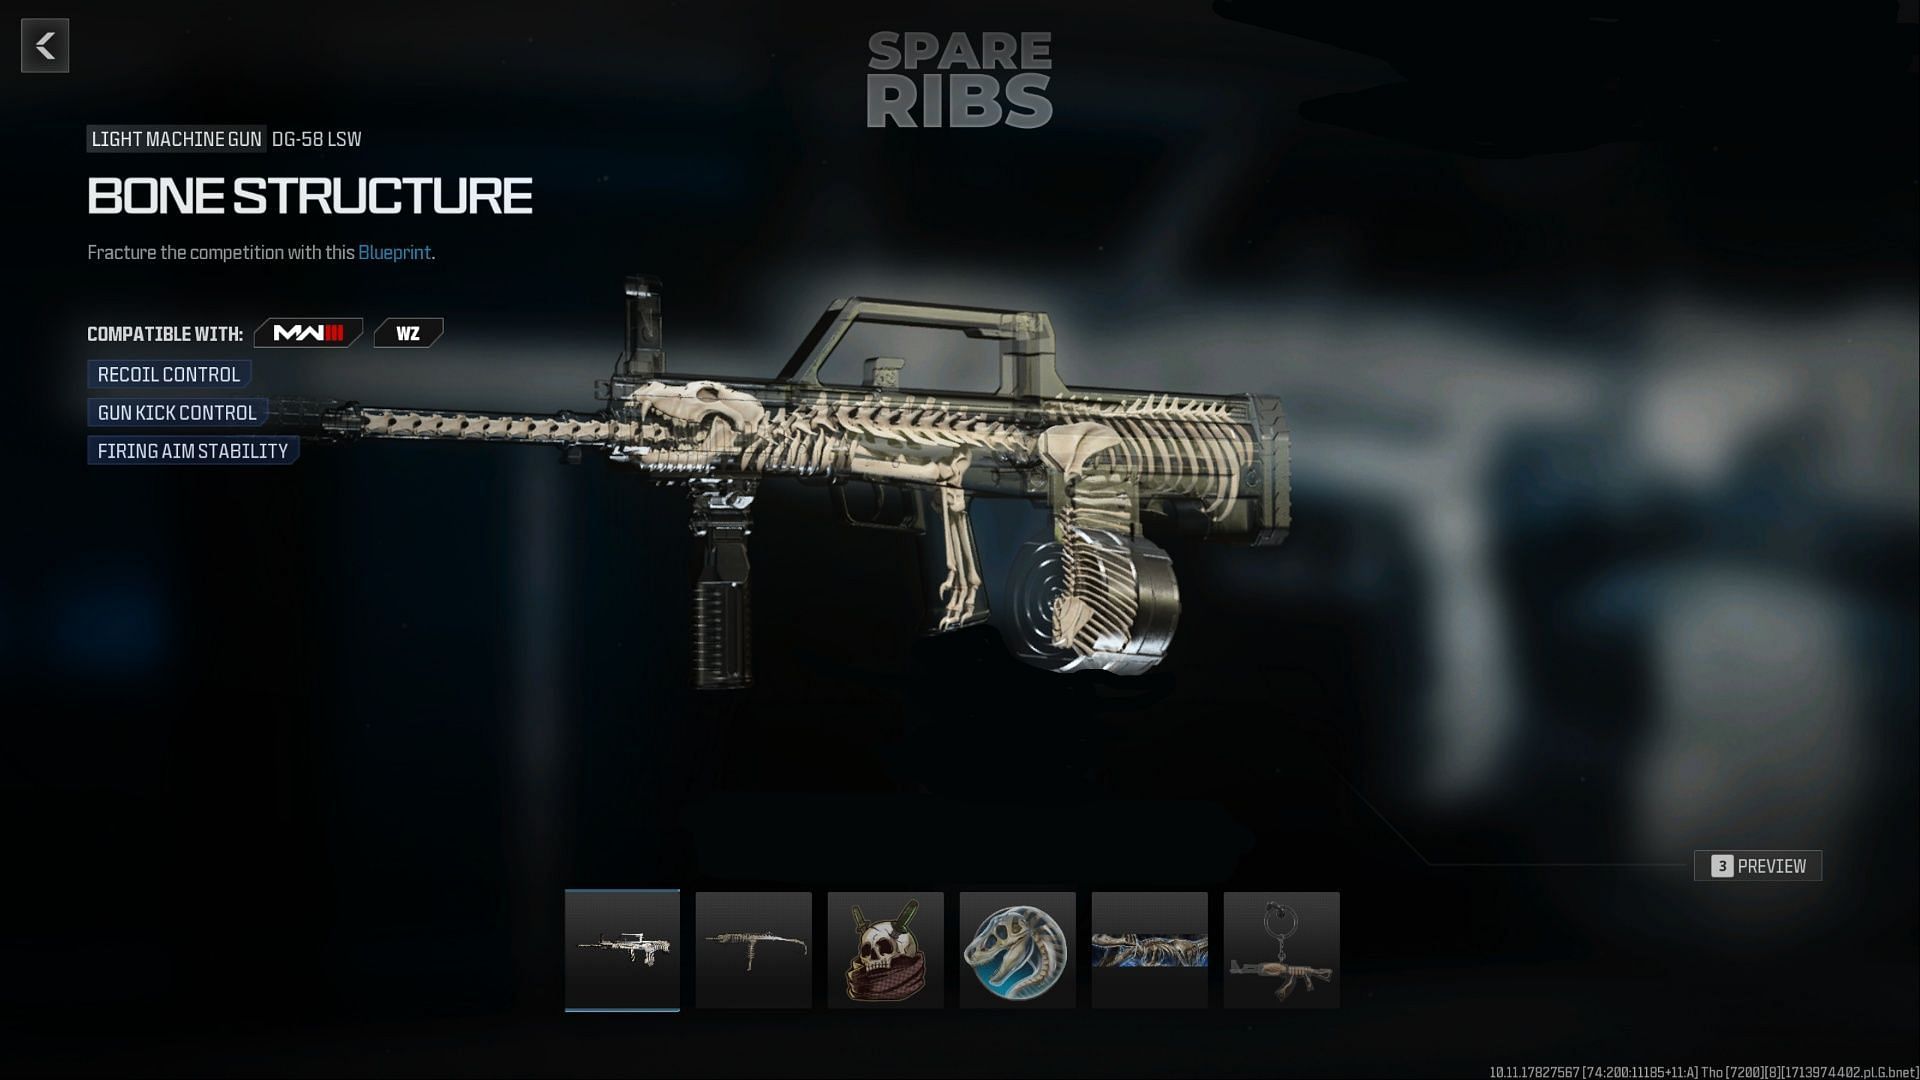 Spare Ribs bundle in MW3 and Warzone (Image via Activision)